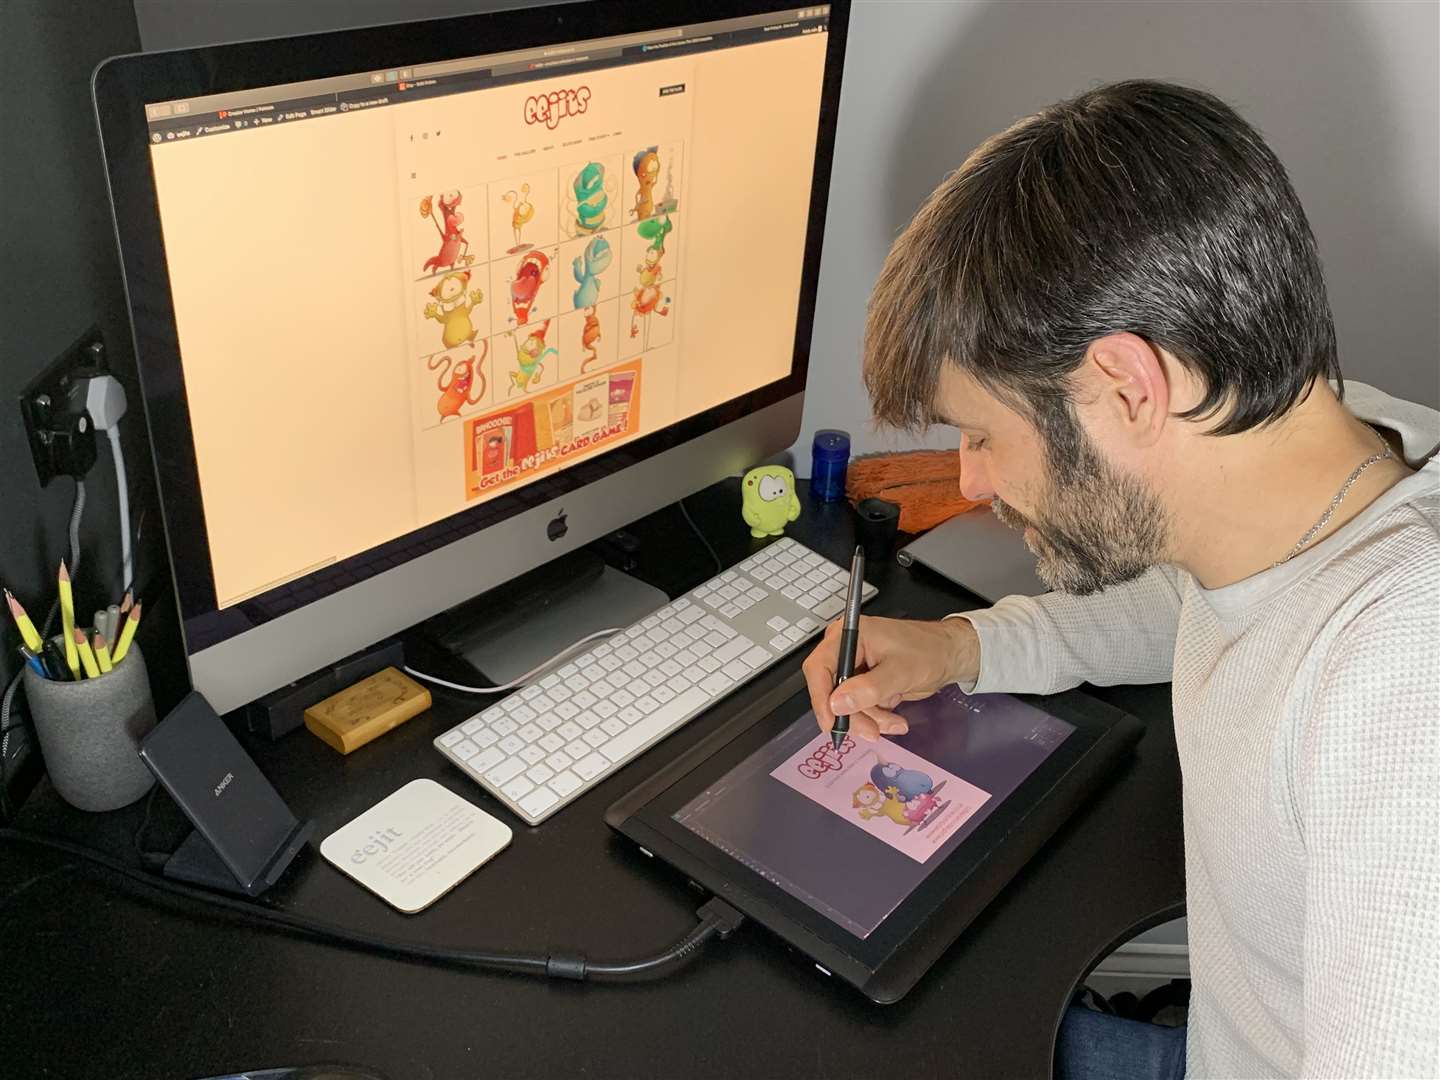 George uses Affinity Designer software when creating his eejits.